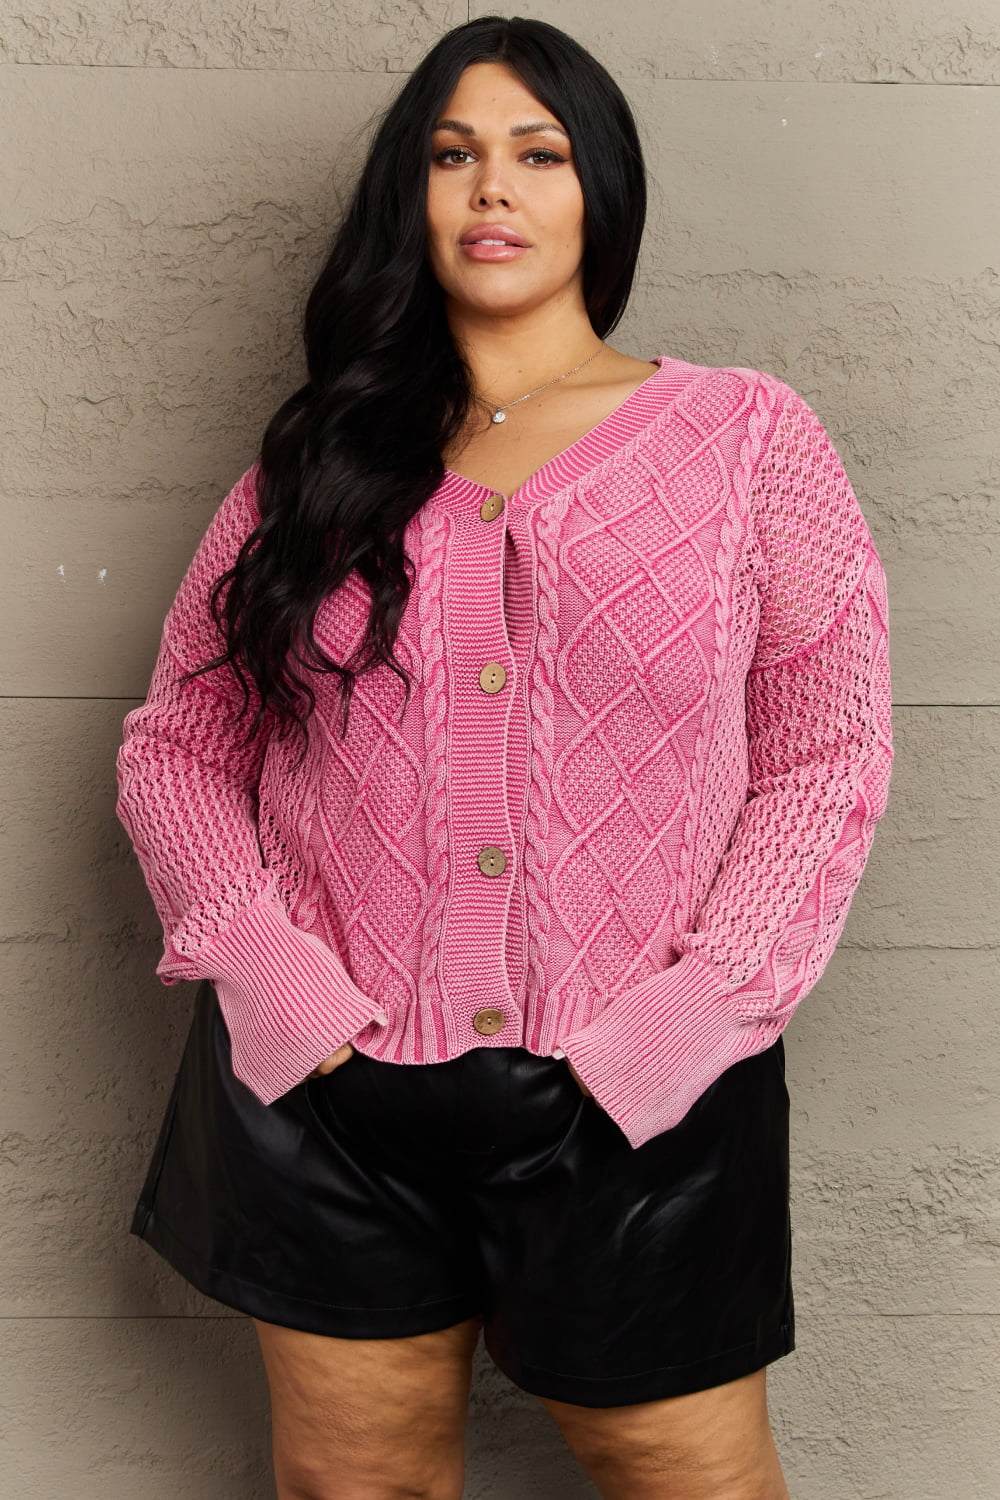 HEYSON Soft Focus Full Size Wash Cable Knit Cardigan in Fuchsia - Online Only